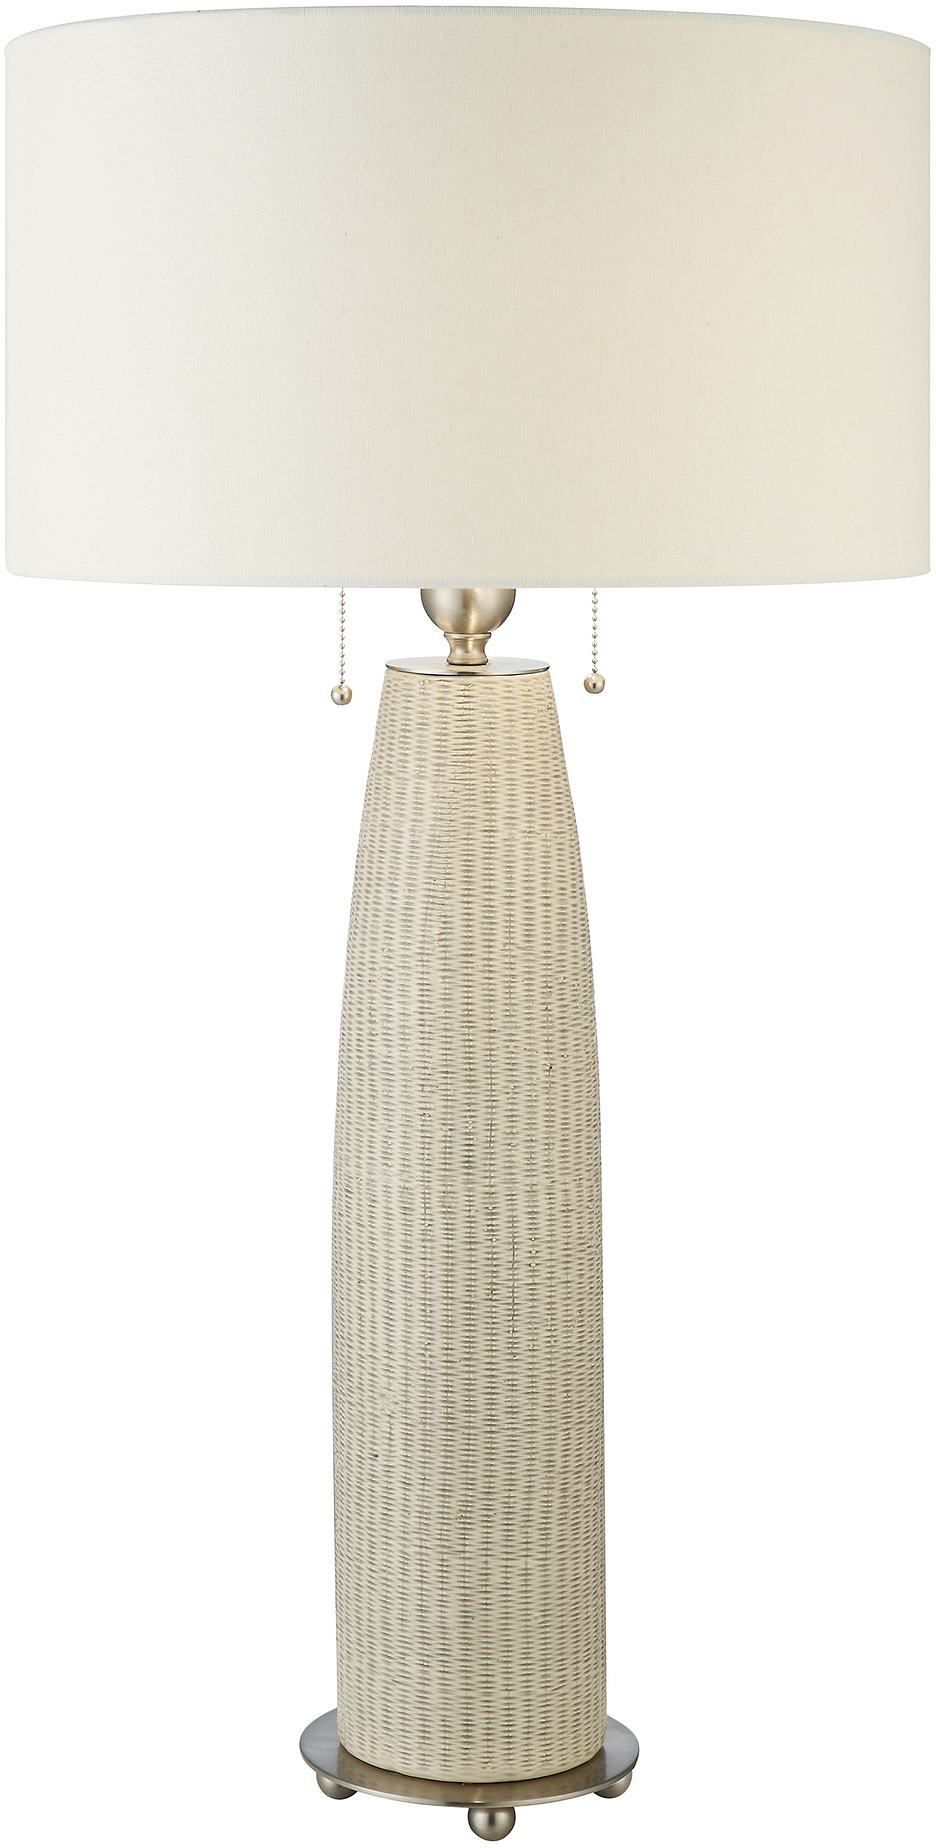 Crestview Collection Barclay Cream Table Lamp